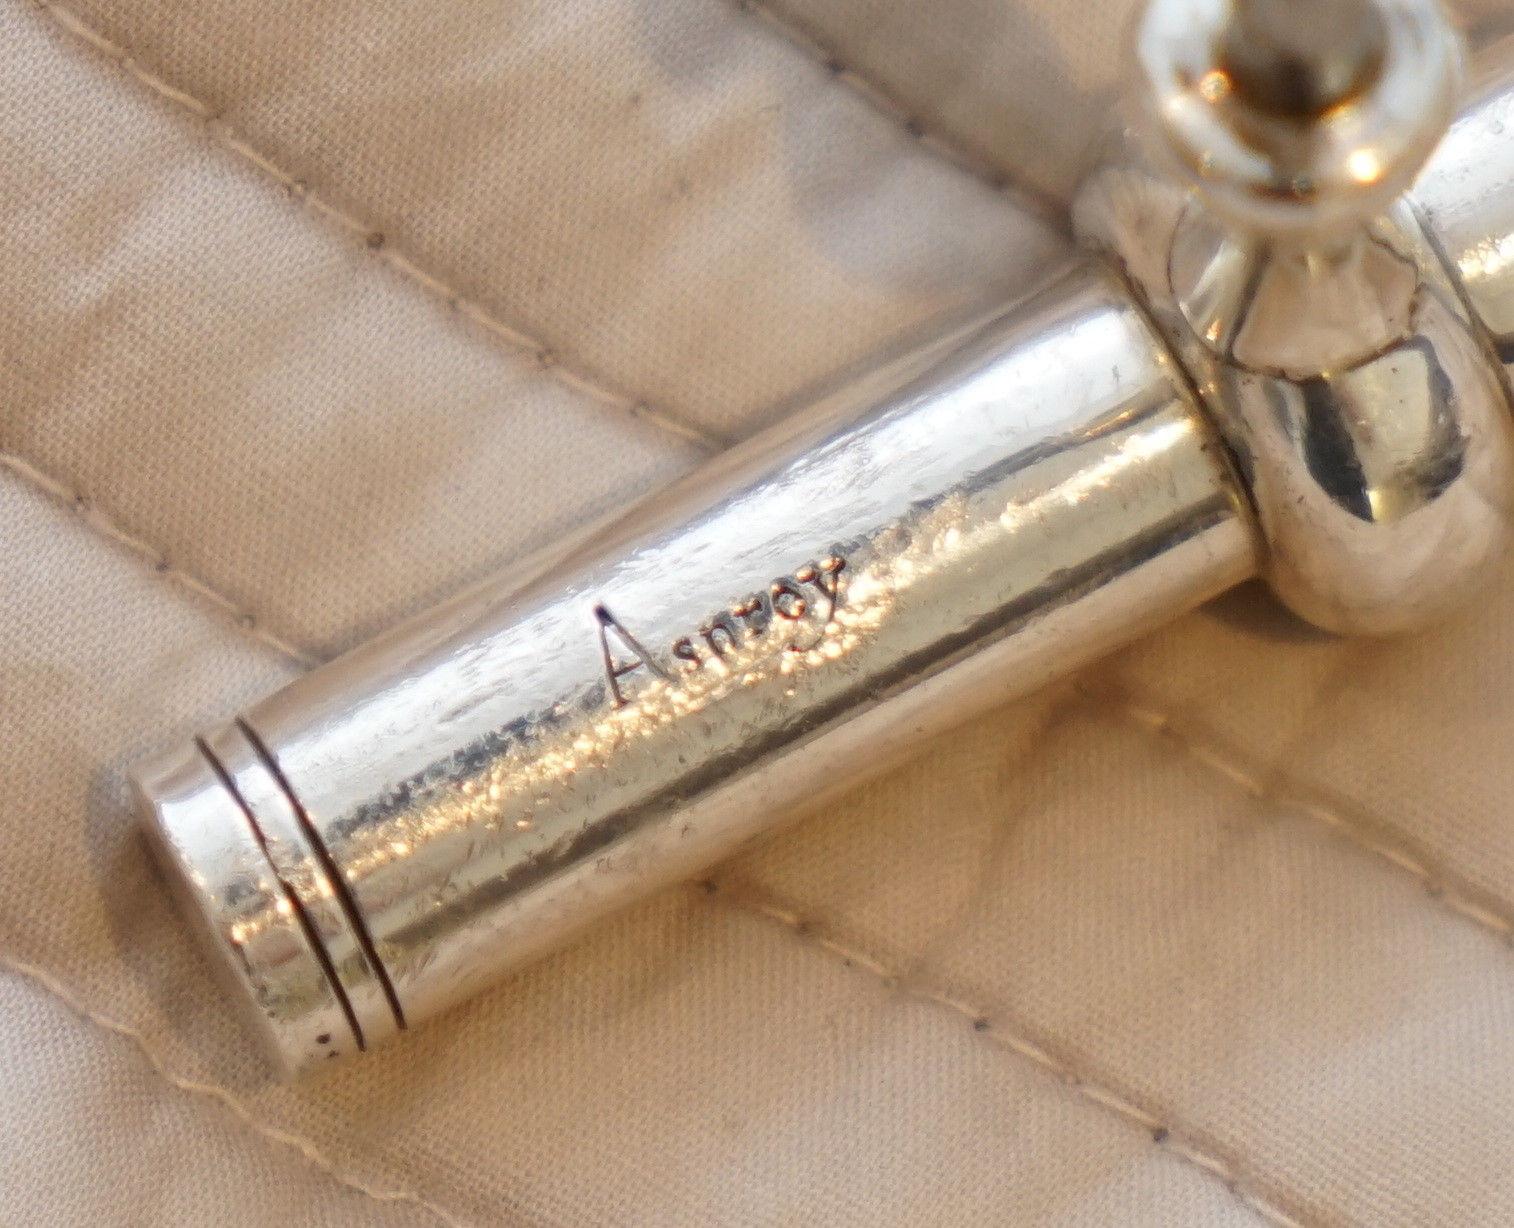 Wimbledon-Furniture

Wimbledon-Furniture is delighted to offer for sale this stunning very rare Asprey solid sterling silver corkscrew fully hallmarked for London 1994.

A very good looking decorative piece, the screw is stainless steel so it won’t